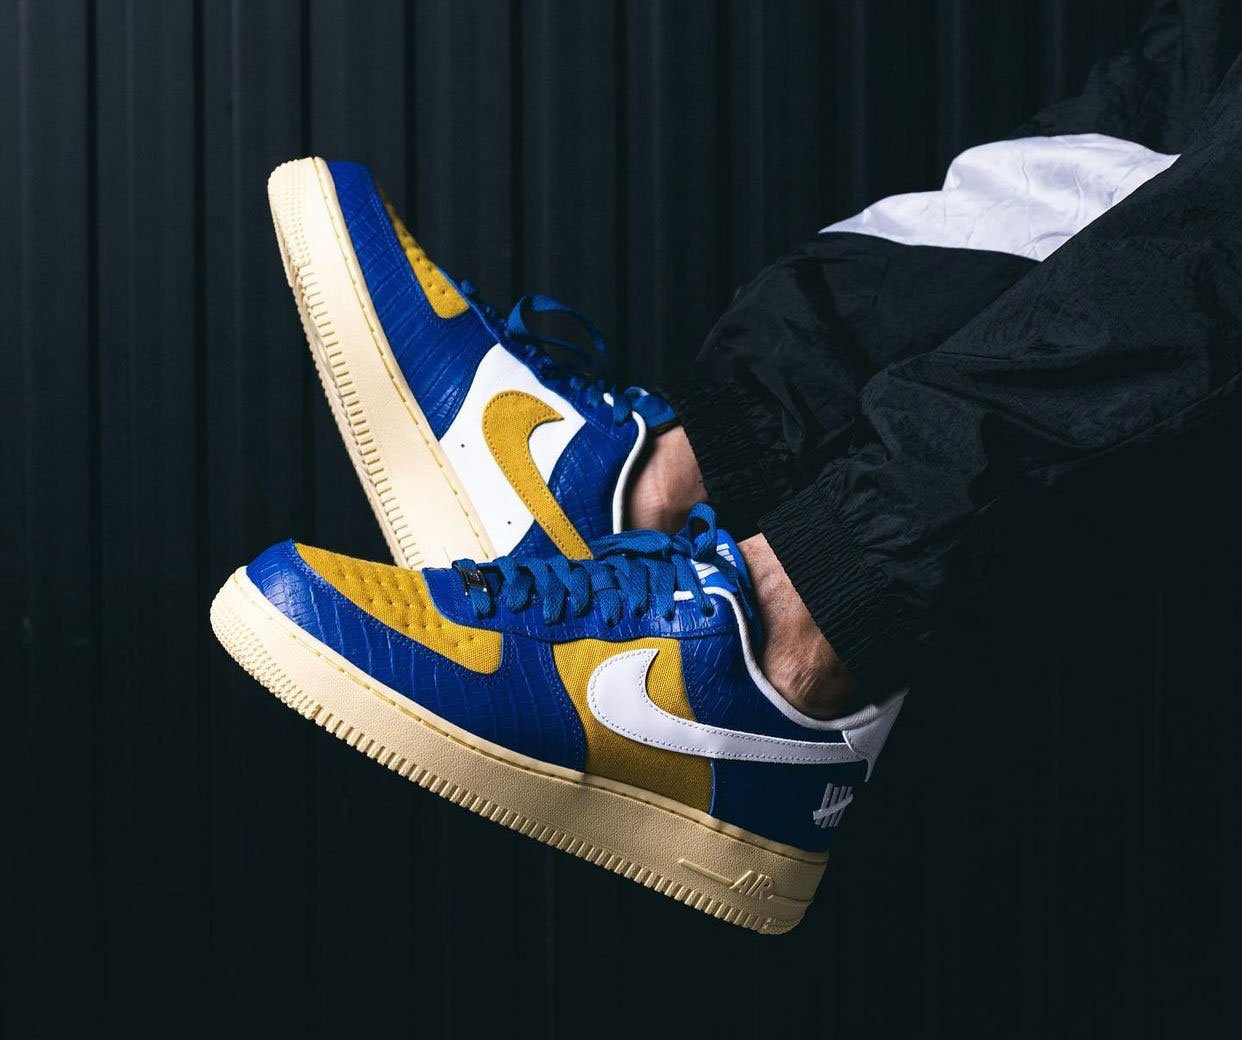 Undefeated Nike Air Force 1 Low Dunk vs AF1 Pack On-Feet